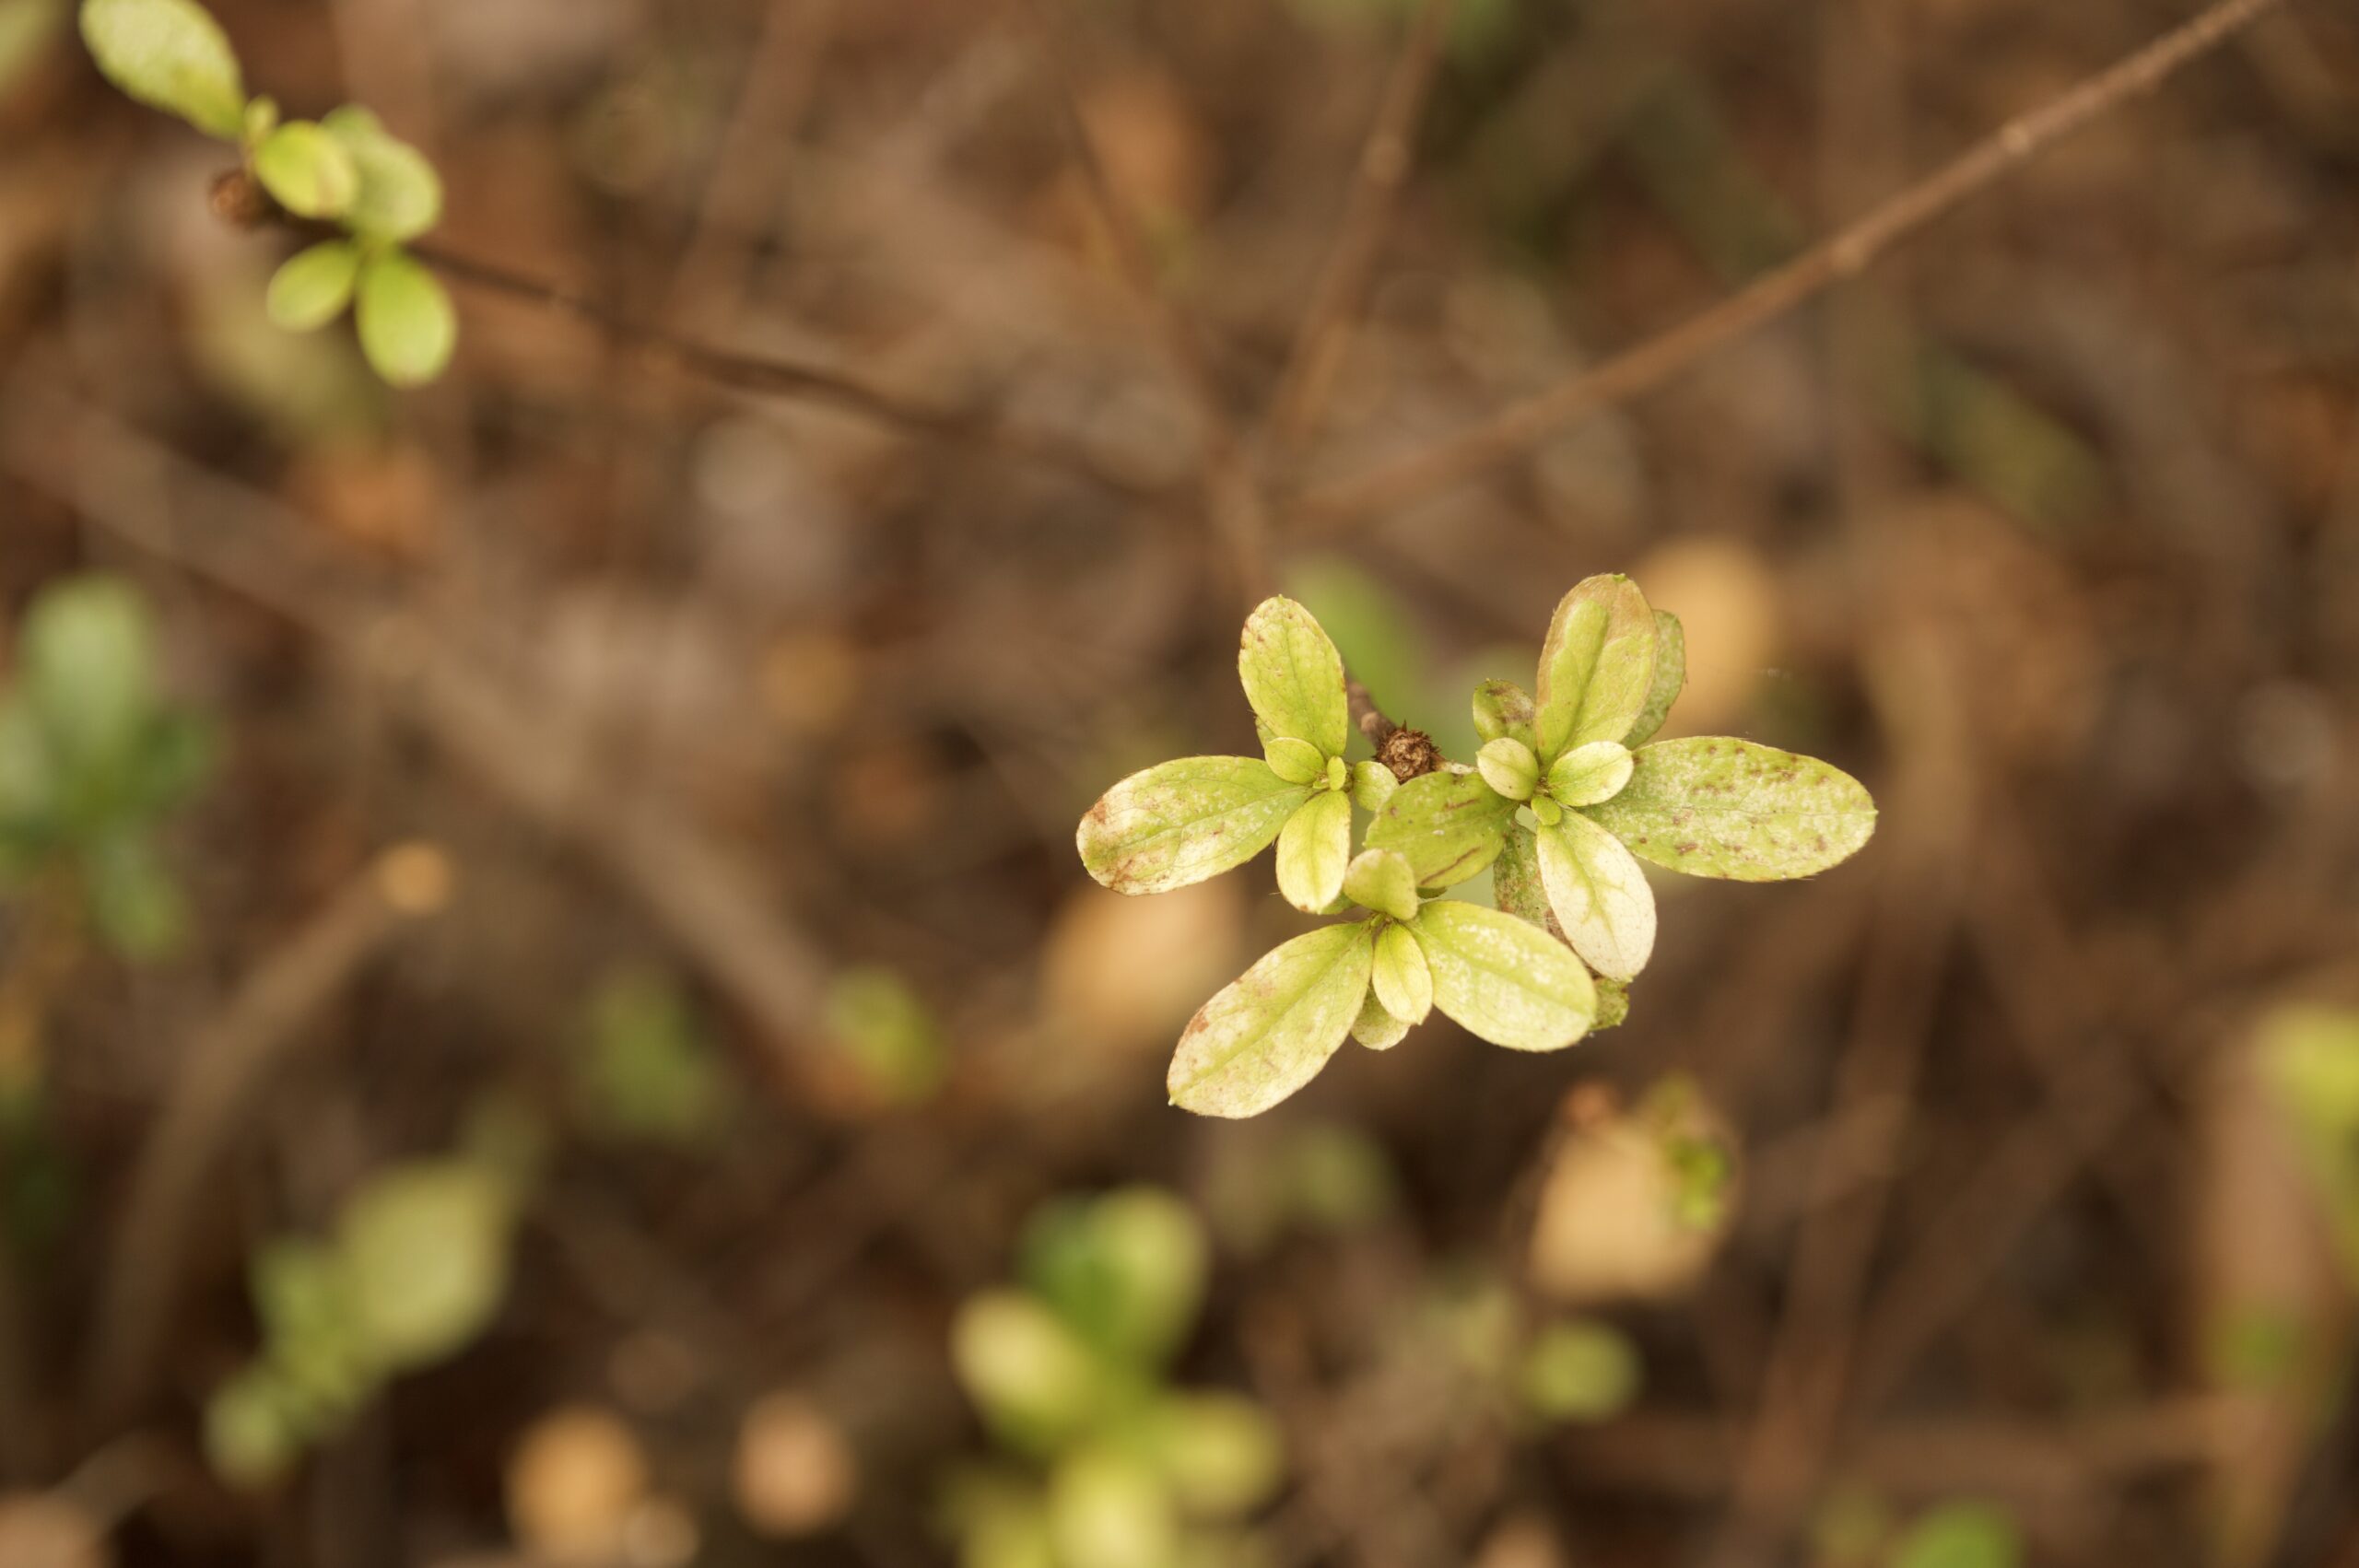 Blurred, brown background with small green leaves in focus